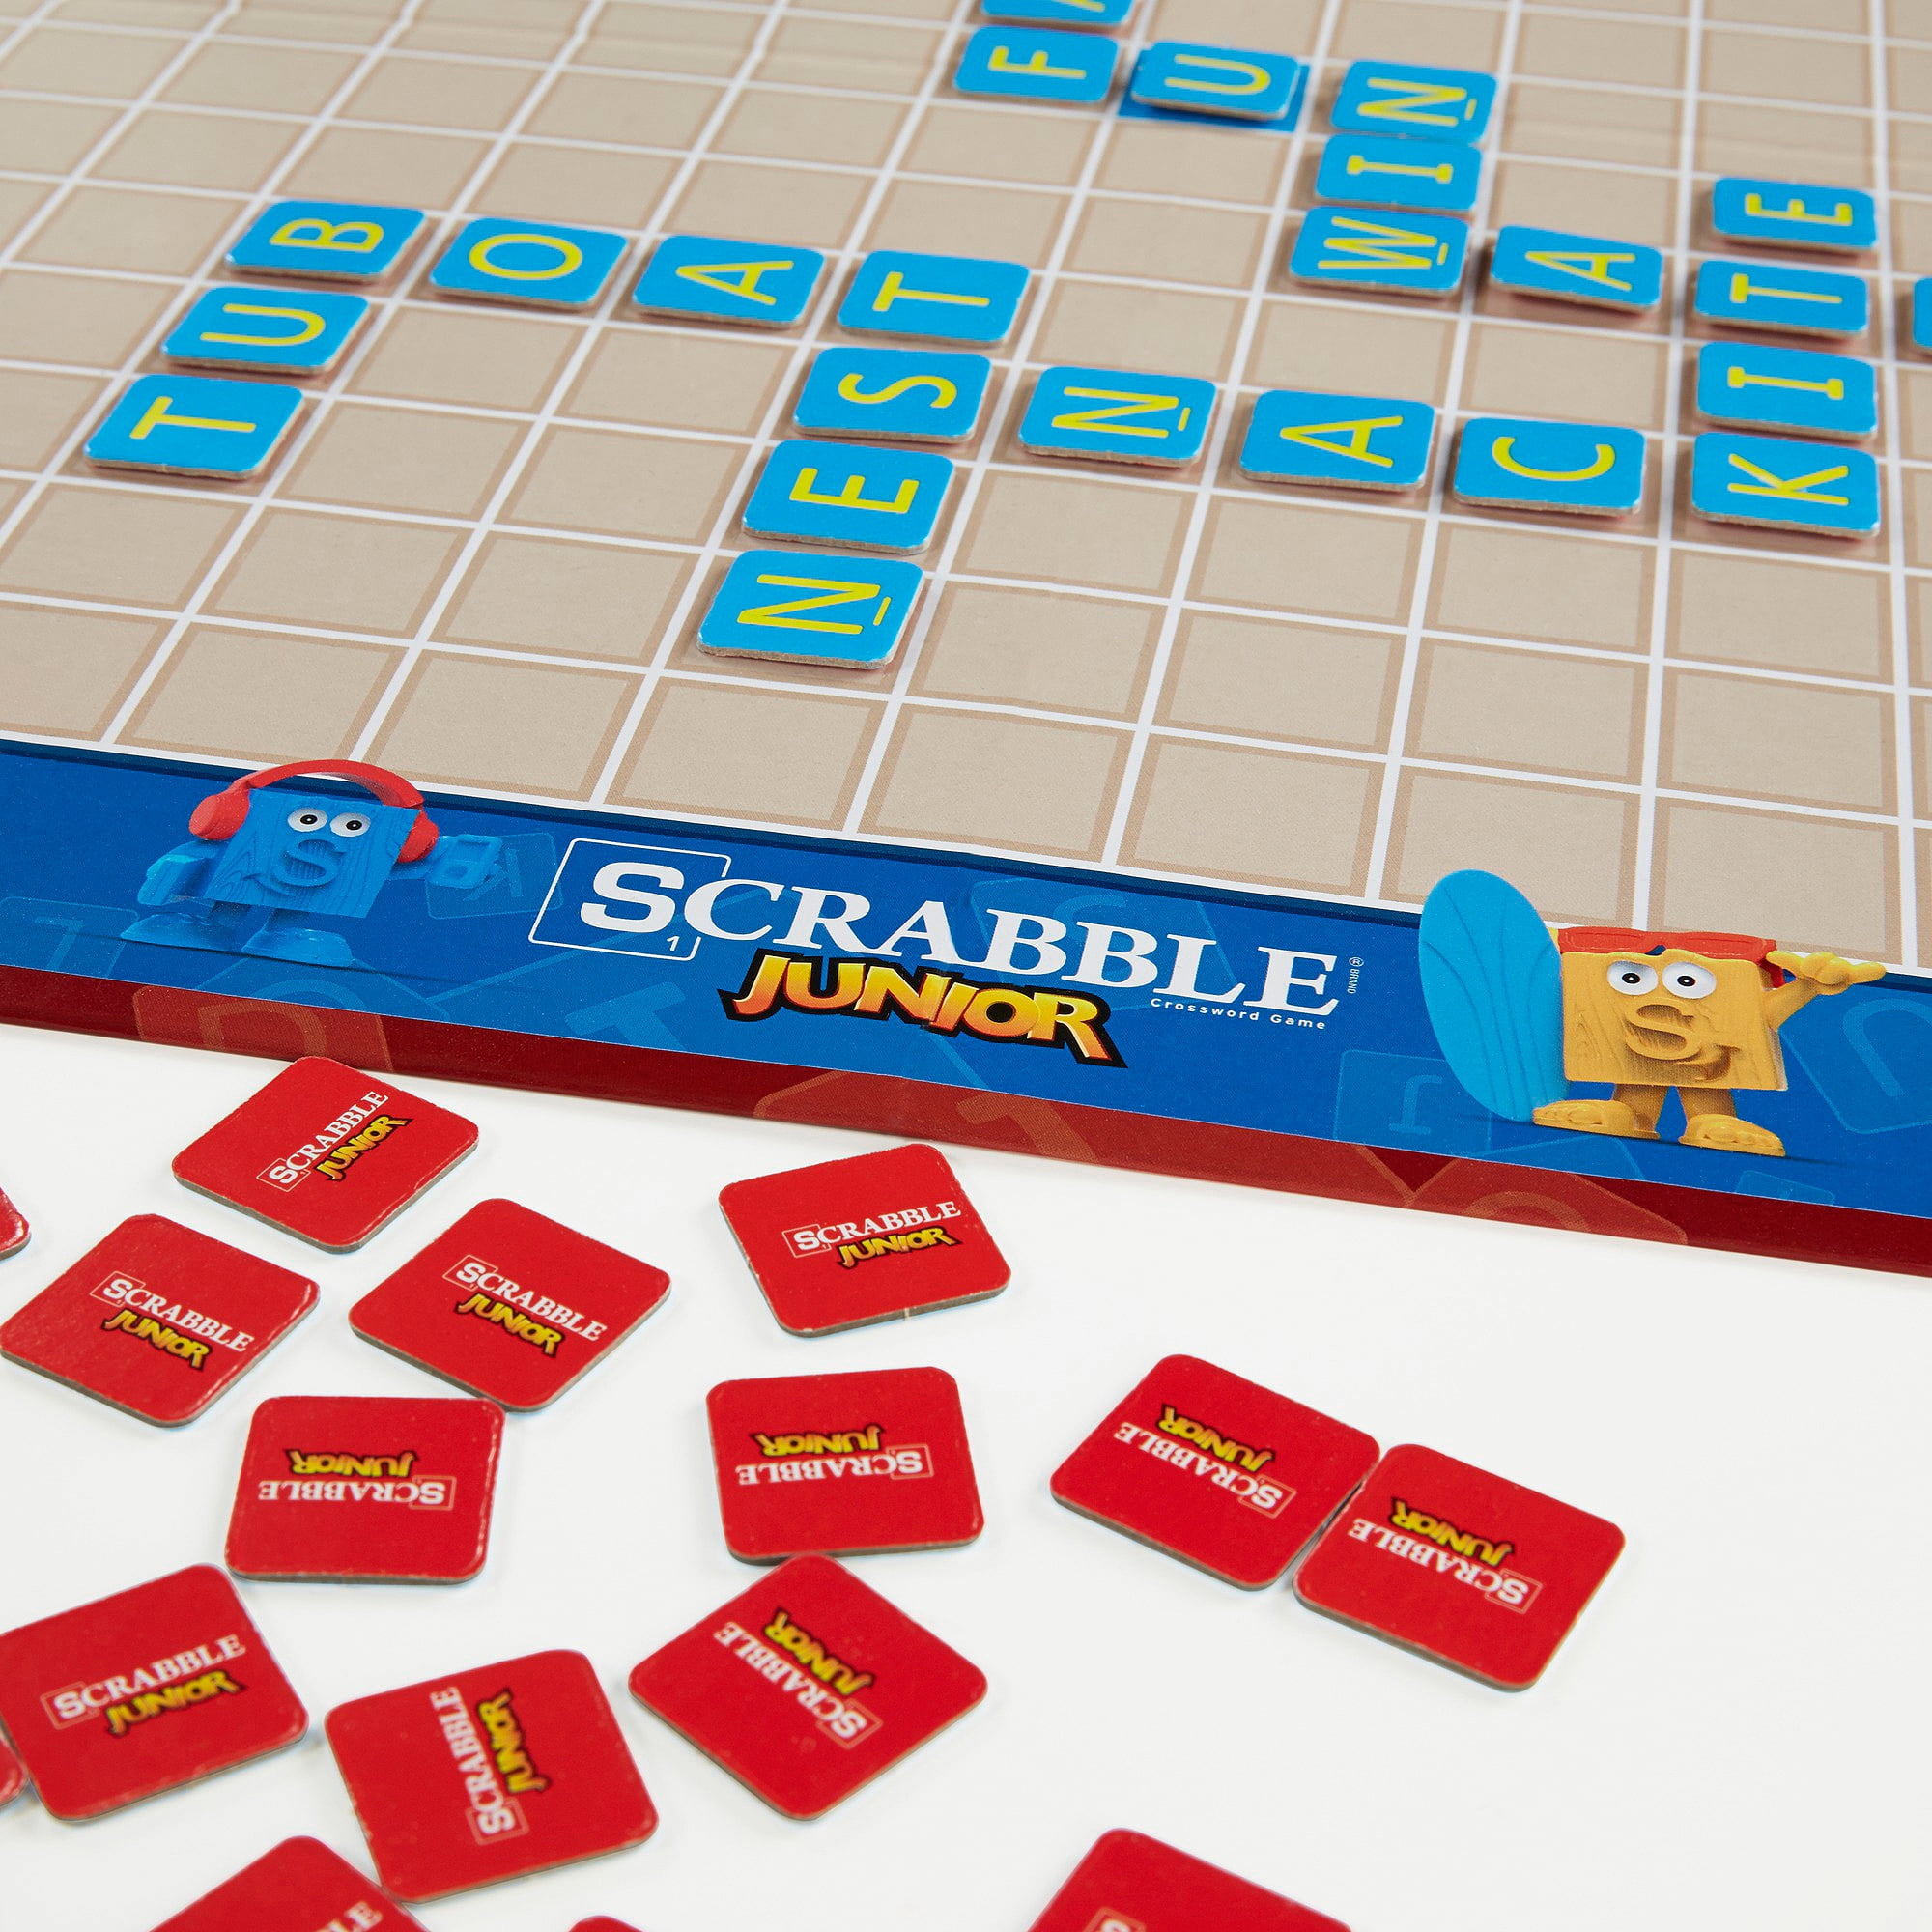 Scrabble Junior Game, Board Game for Kids Ages 5 and Up, for 2-4 